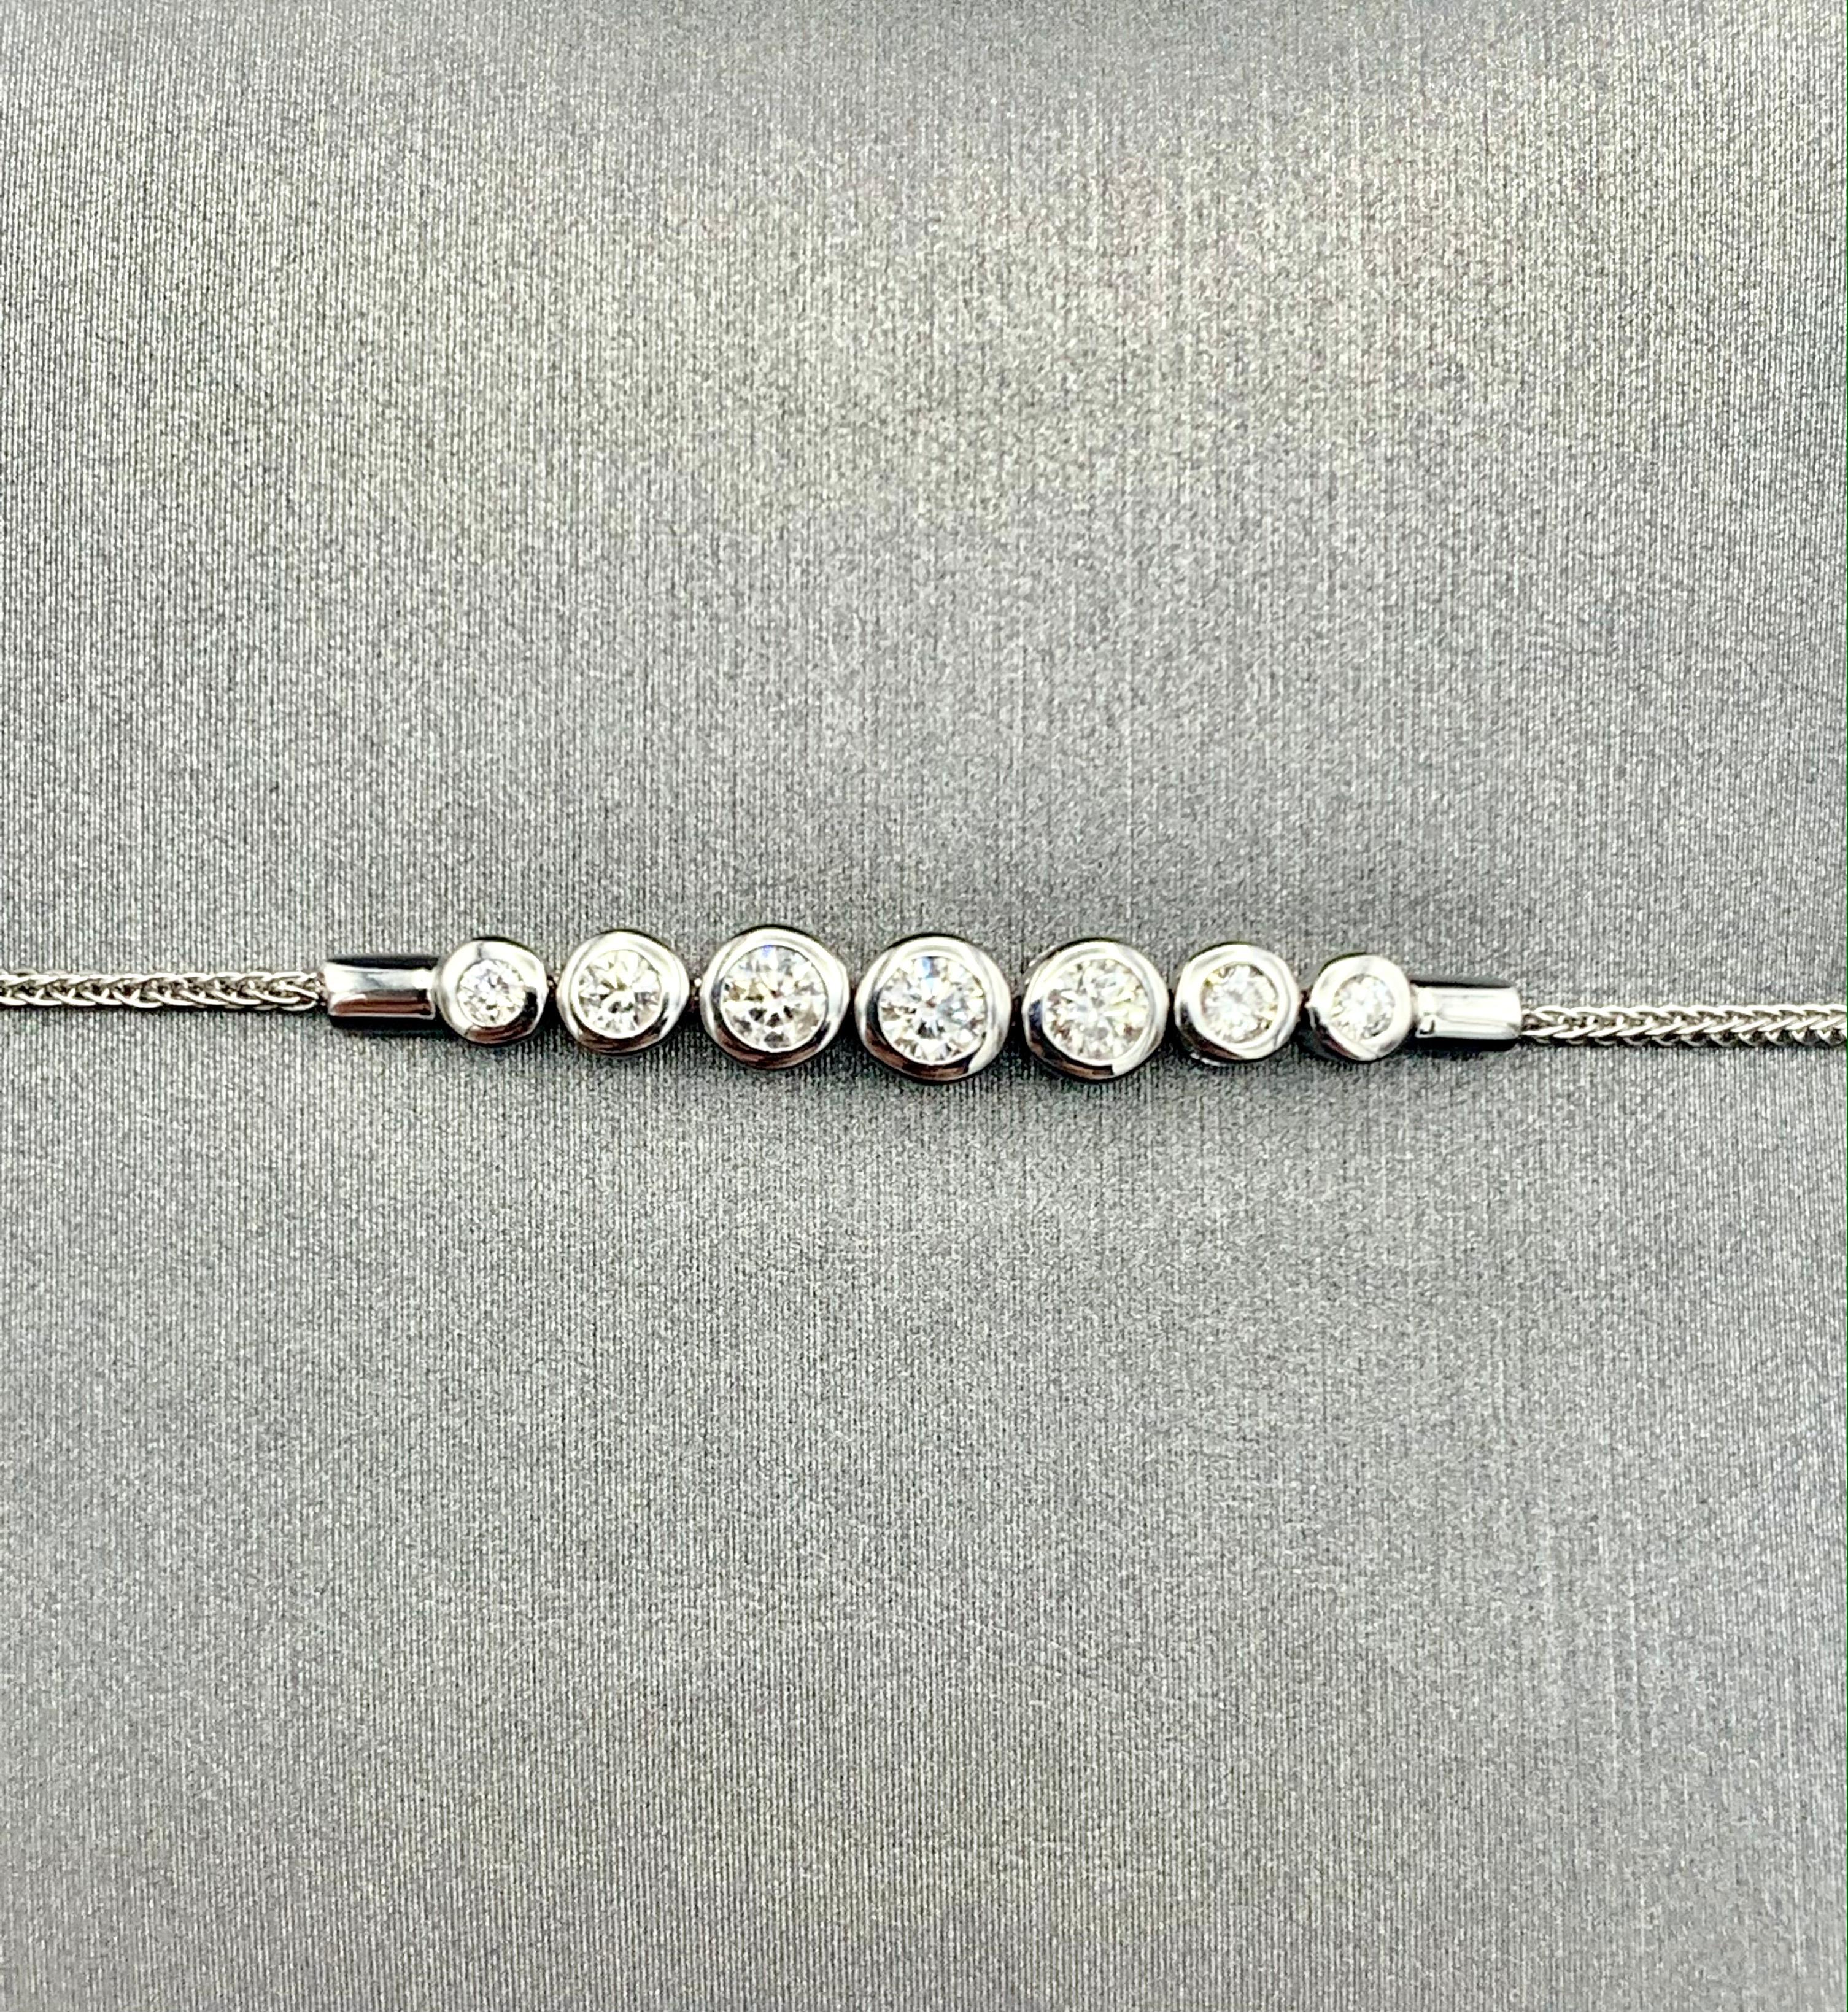 0.34 Carat White Gold Diamond Bolo Bezel Set Bracelet In New Condition For Sale In Great Neck, NY